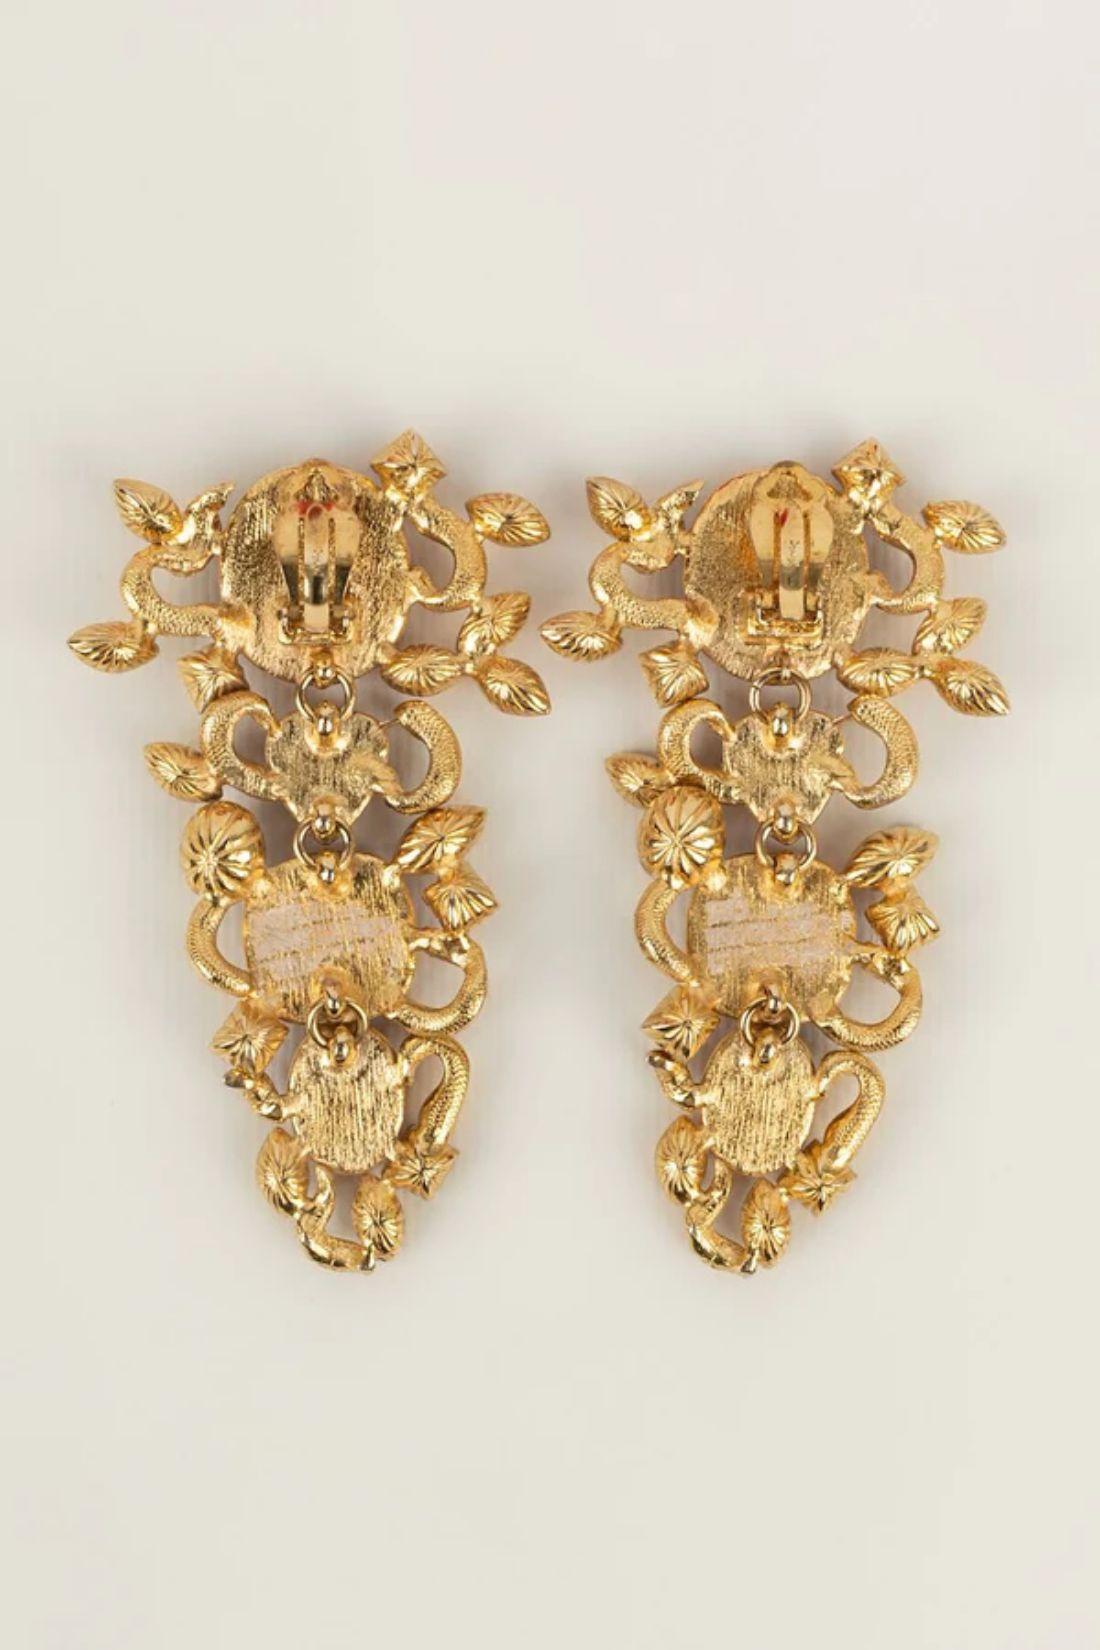 Yves Saint Laurent Earrings in Gold Plated Rhinestone and Resin For Sale 2